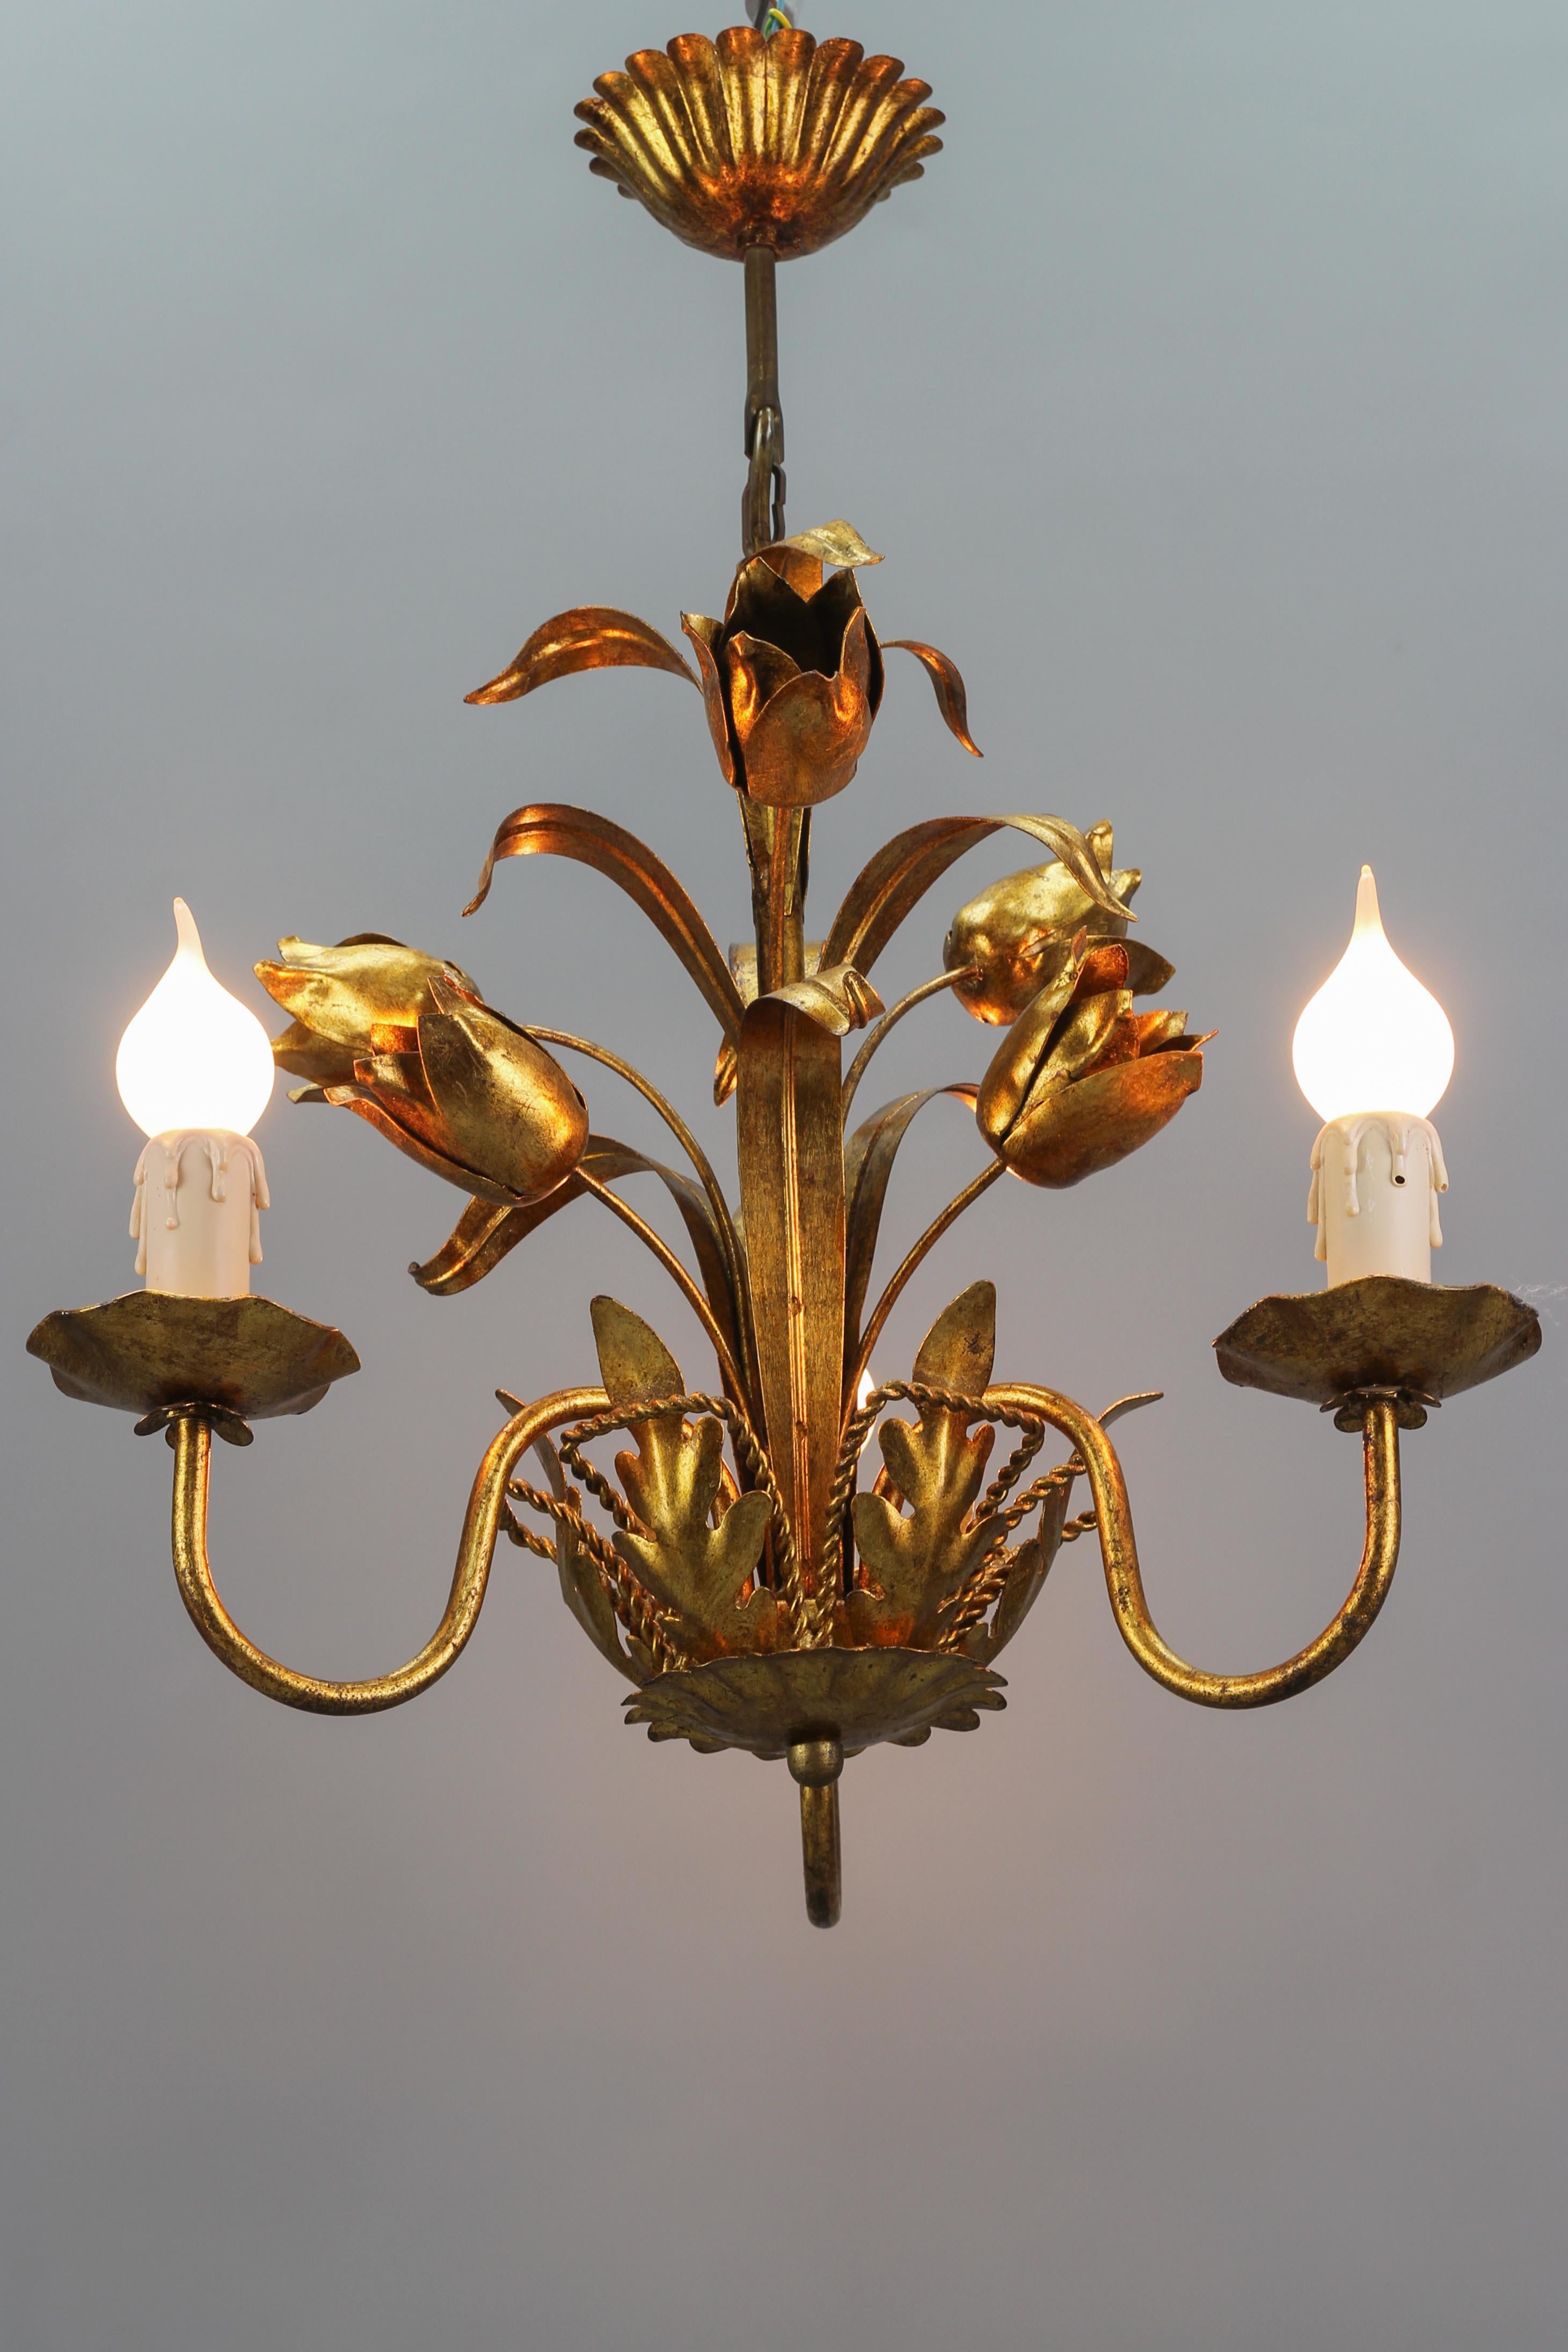 A beautiful Italian gilt metal/toleware three-light chandelier from the 1970s. The golden light fixture is adorned with charming flowers - tulips and leaves. 
Three sockets for E14 size light bulbs.
Dimensions: height: 55 cm / 21.65 in; diameter: